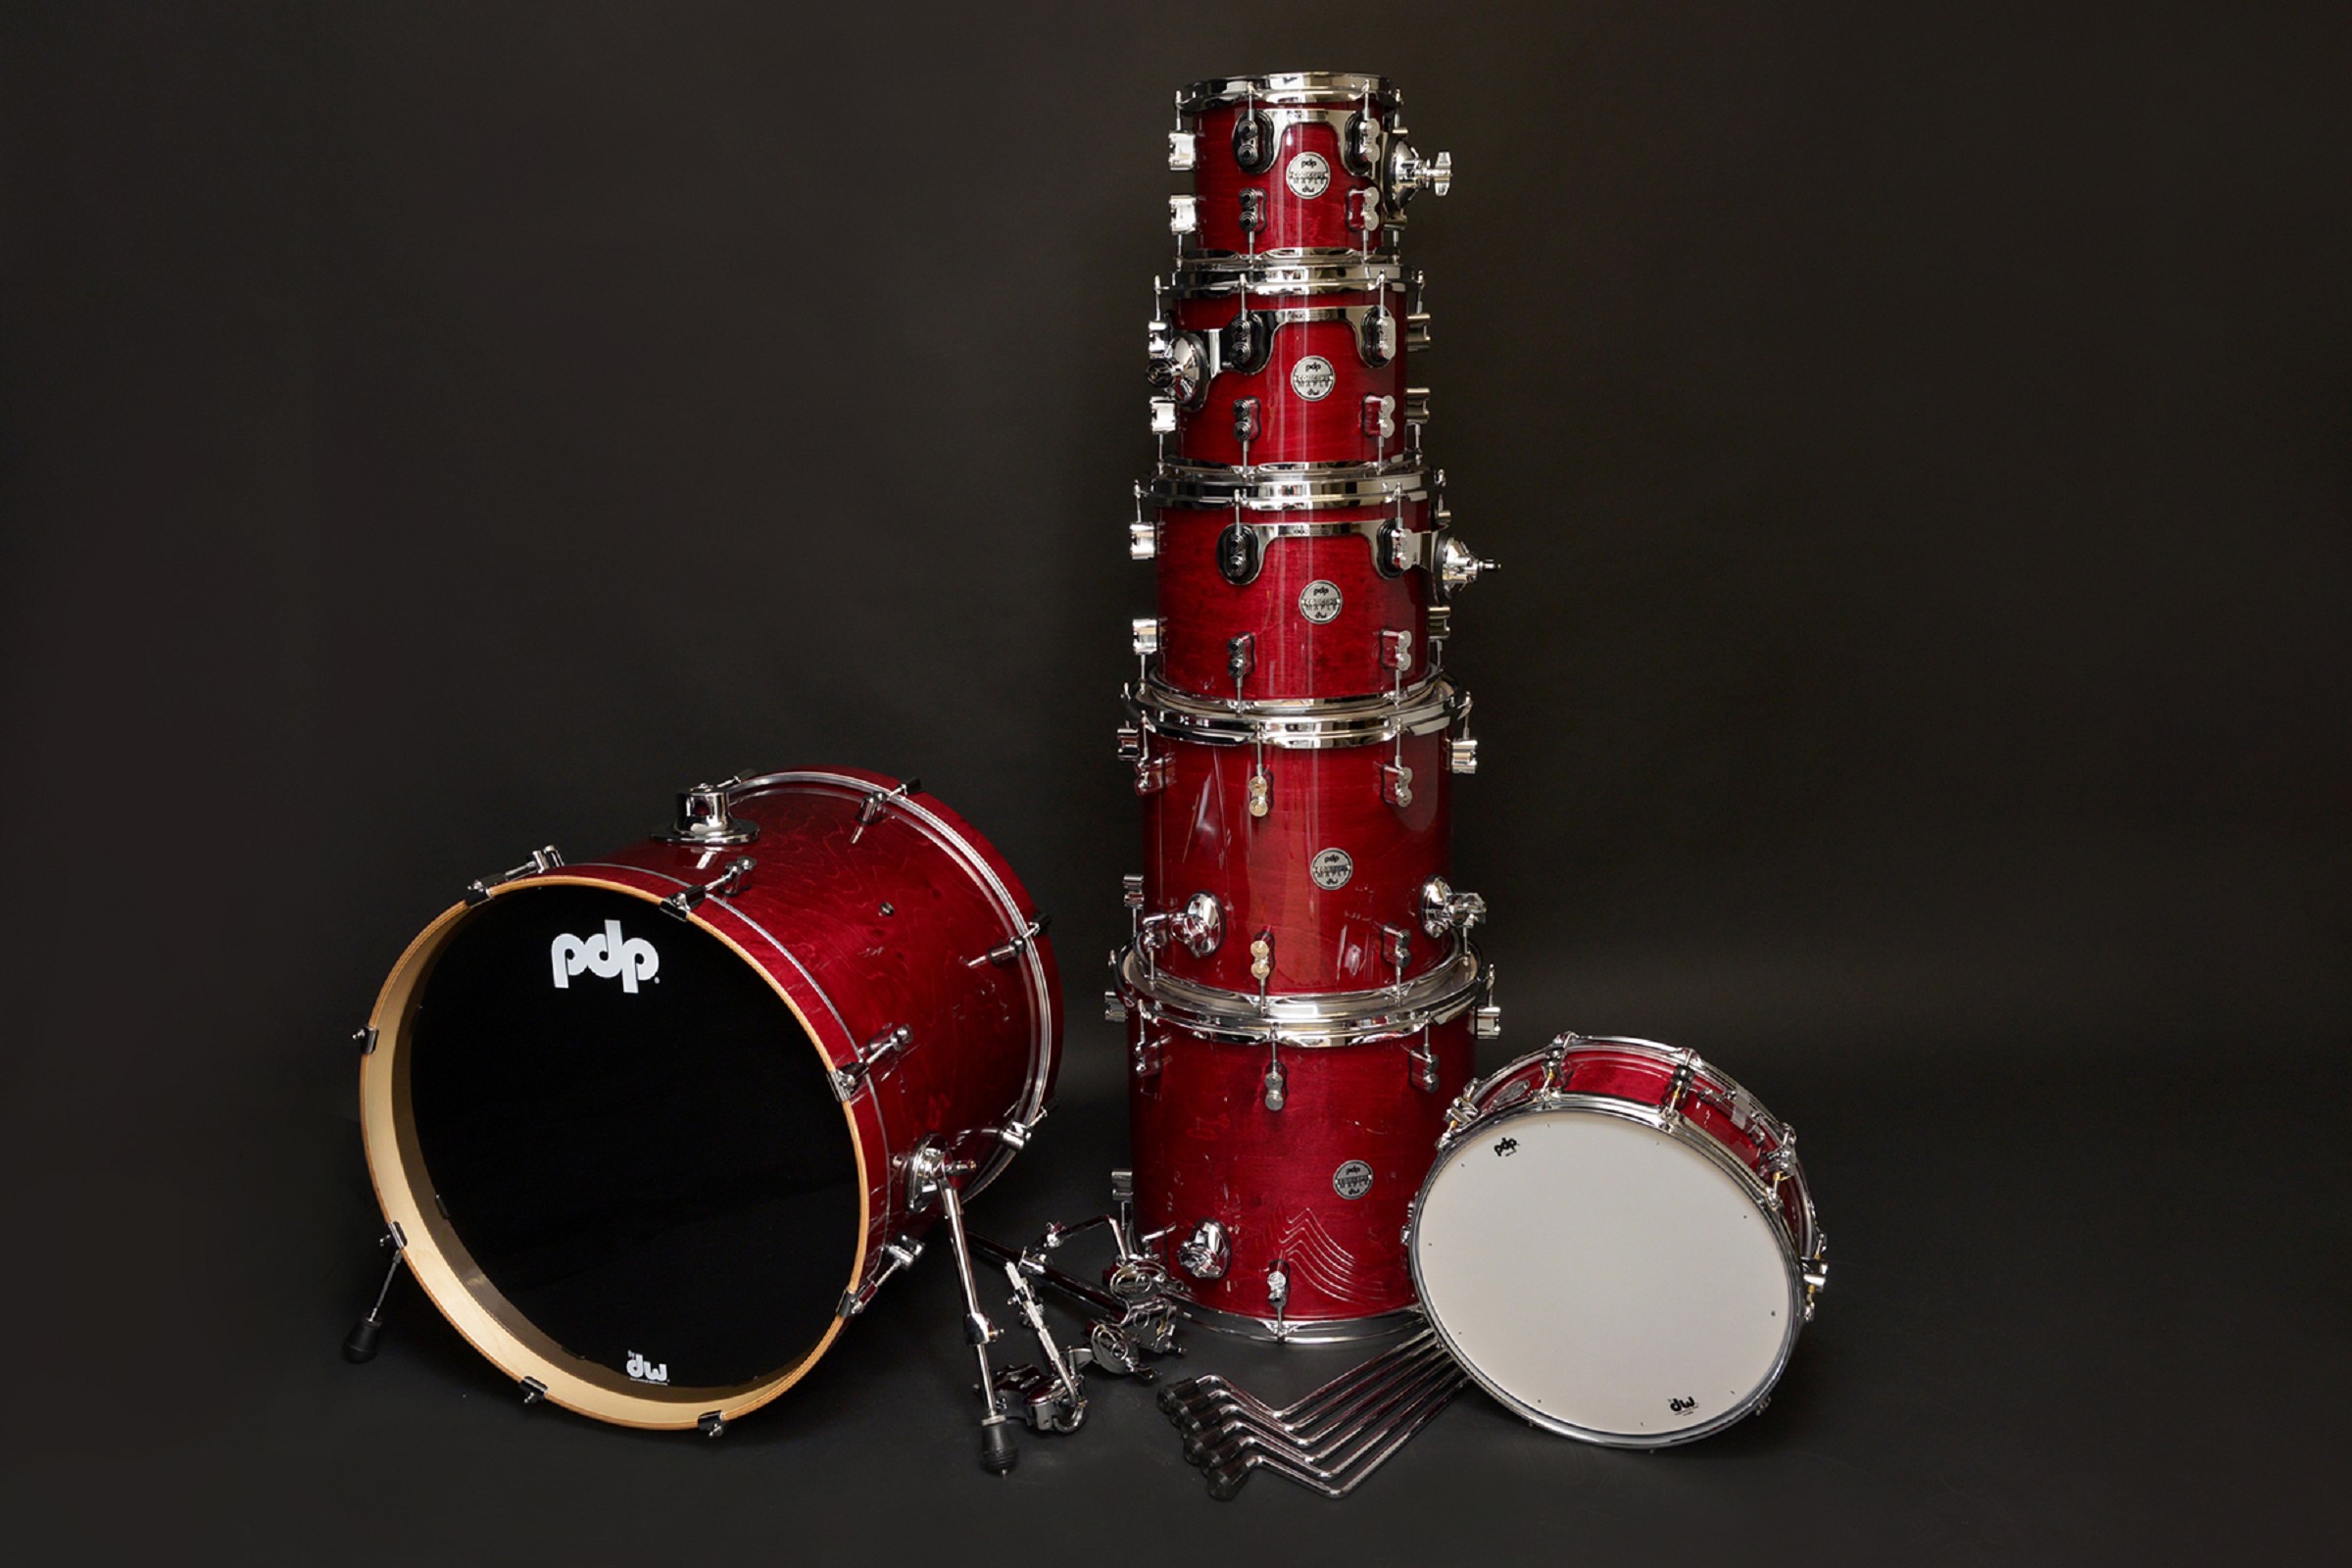 PDP Concept Maple 22/8/10/12/14/16/14 Cherry Stain + Hardwareset 900